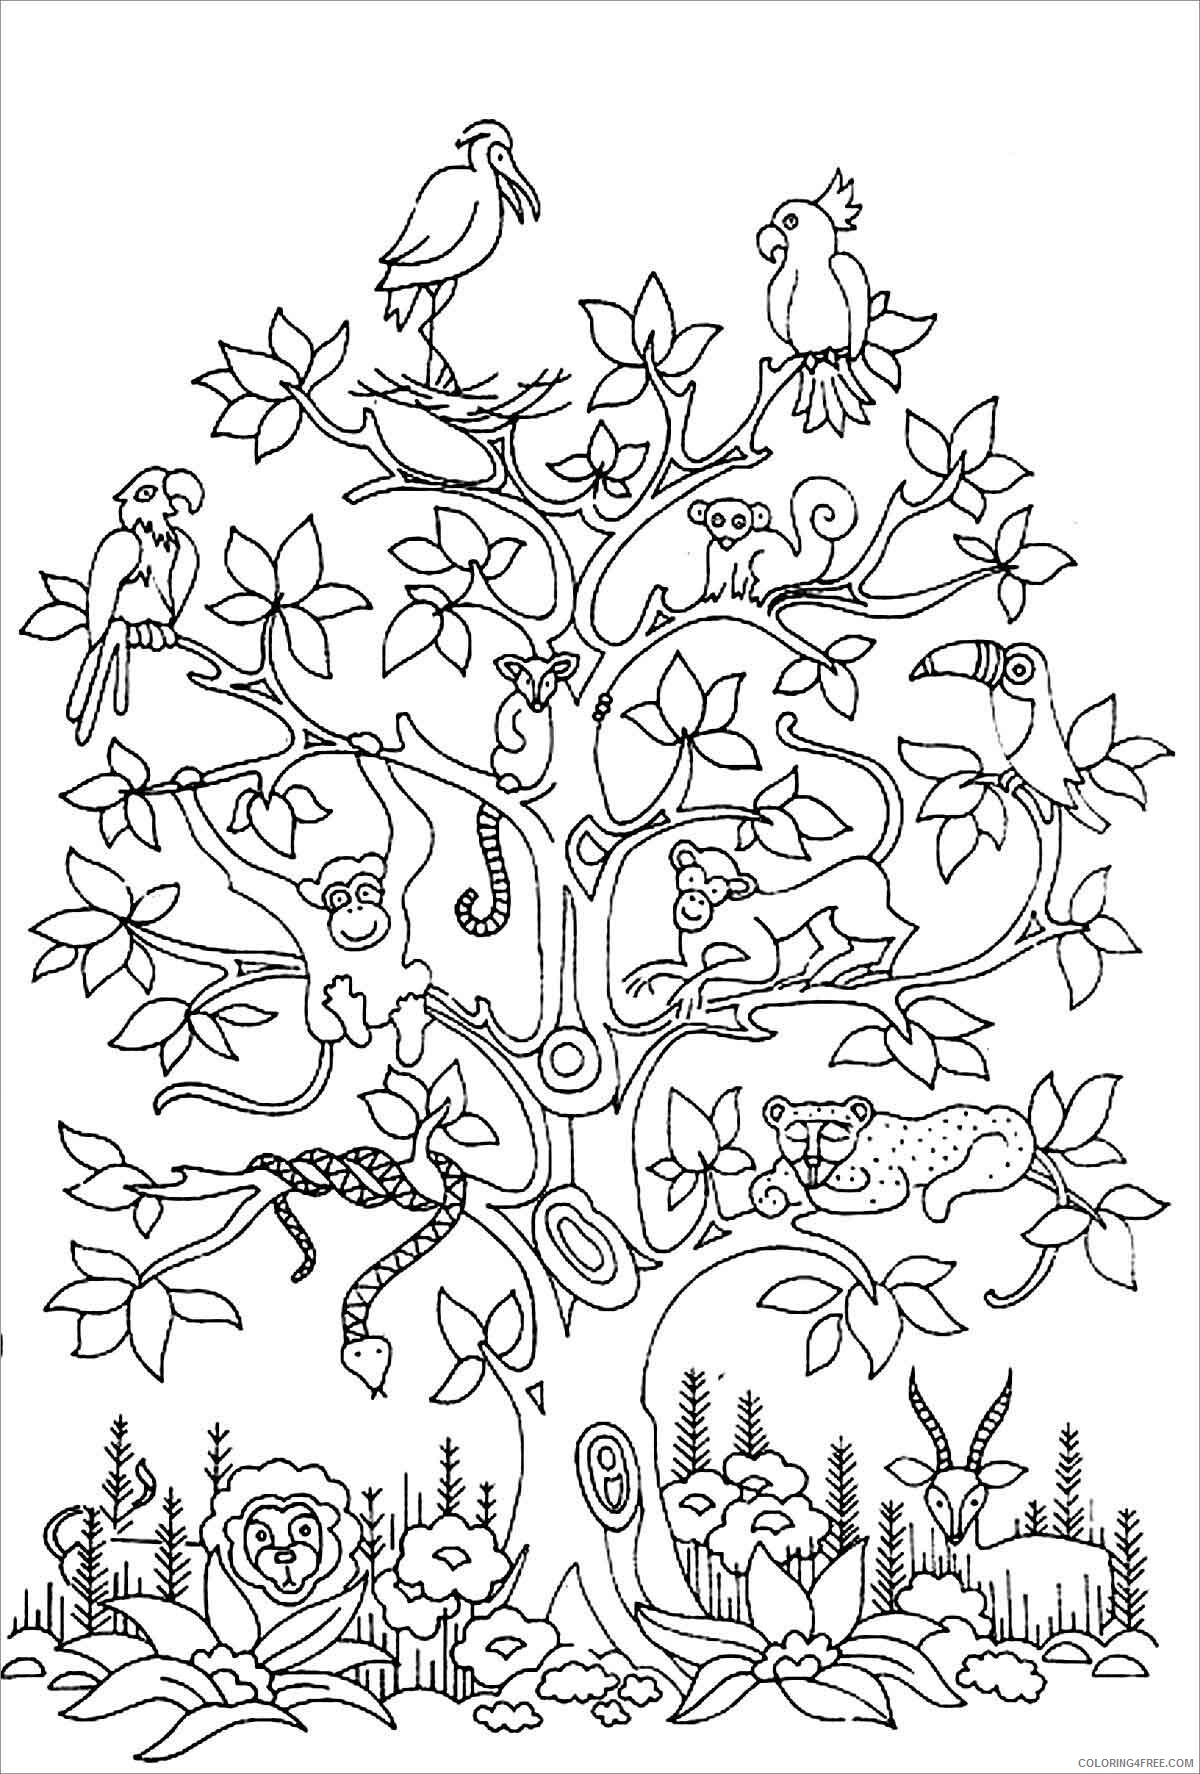 Printable Tree Coloring Pages Tree Nature printable animals lives on trees 2021 Coloring4free